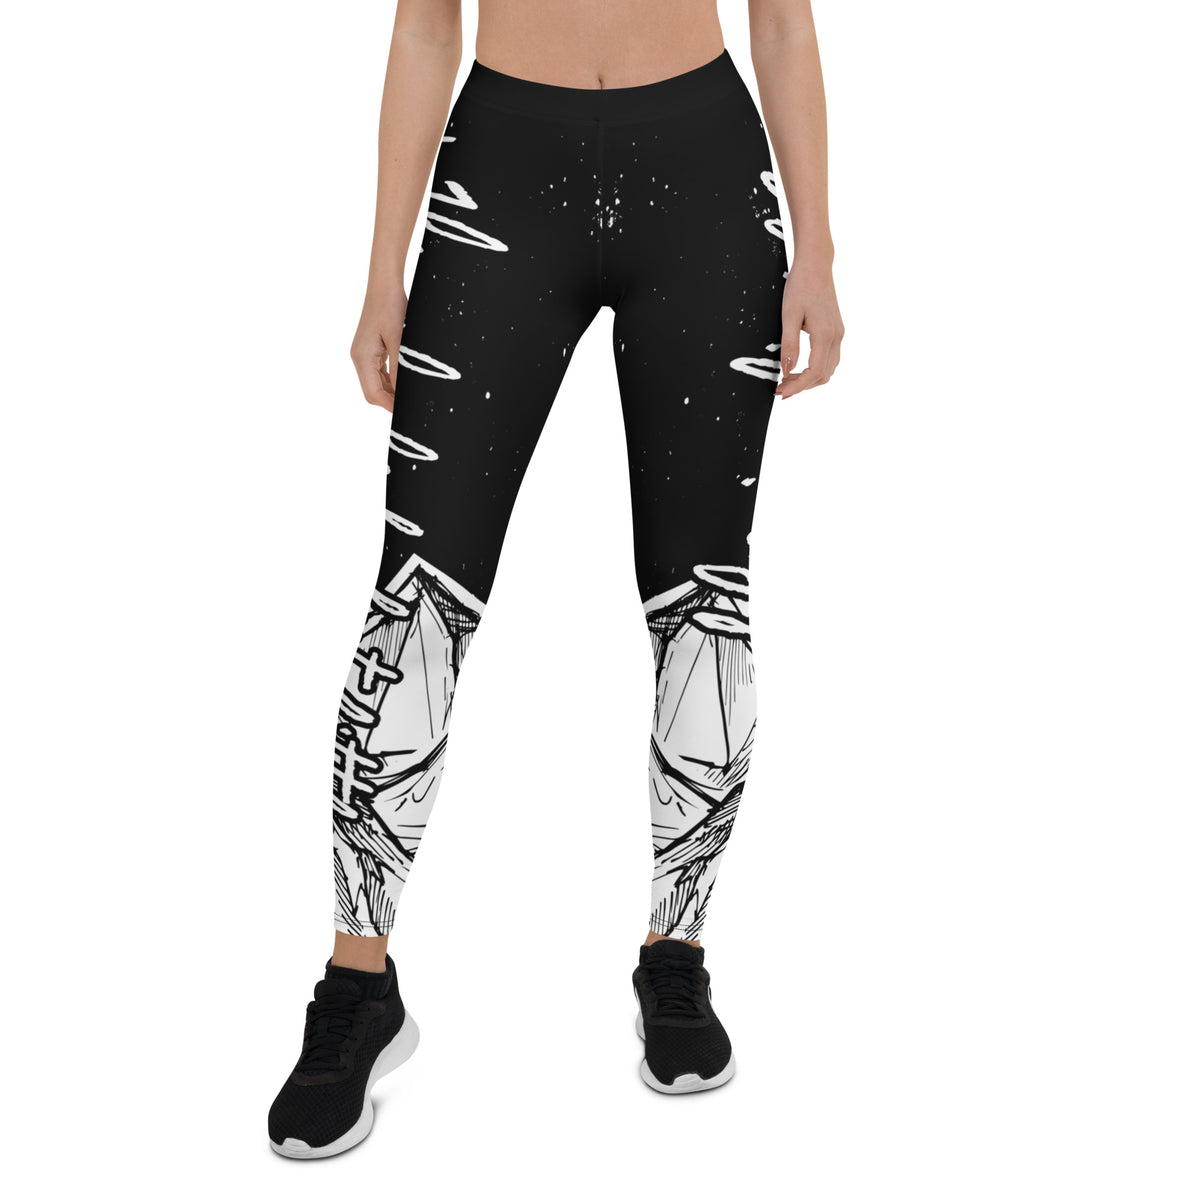 Though She Be But Little, She Is Fierce - Leggings - HikeRunLive Collection